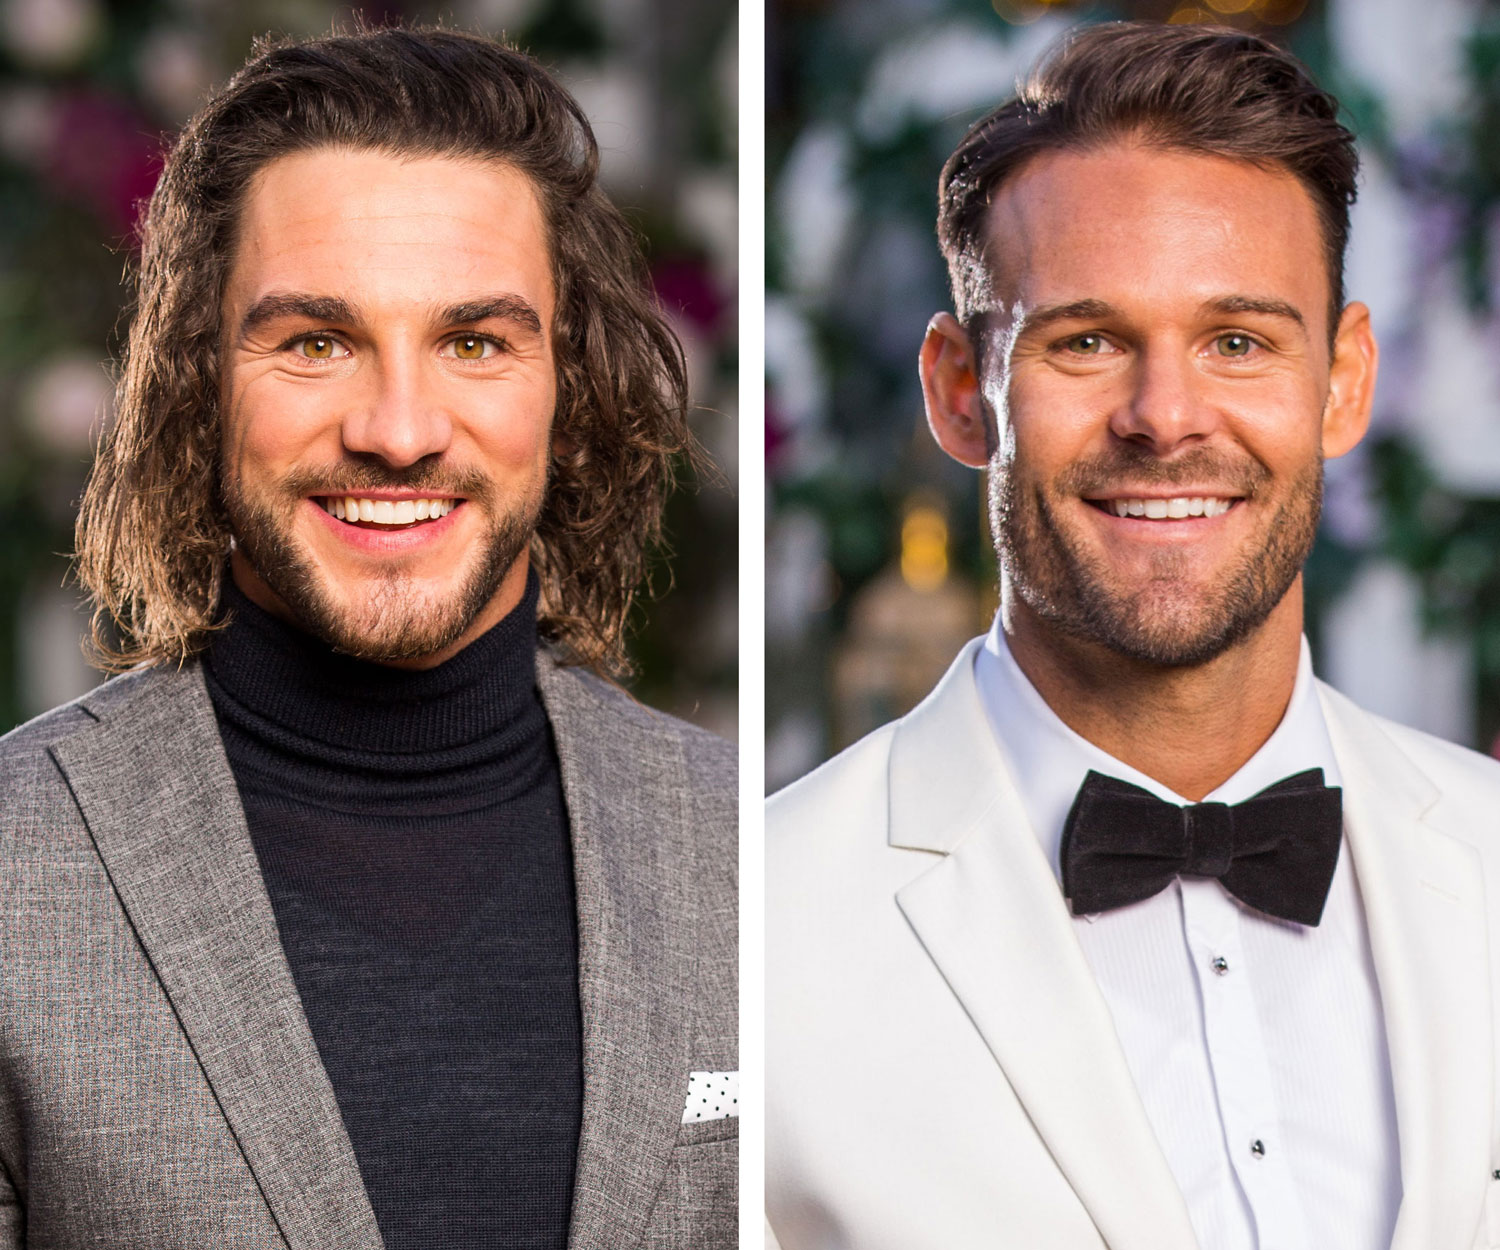 The Bachelorette Australia 2019: Meet the contestants vying for Angie Kent’s heart